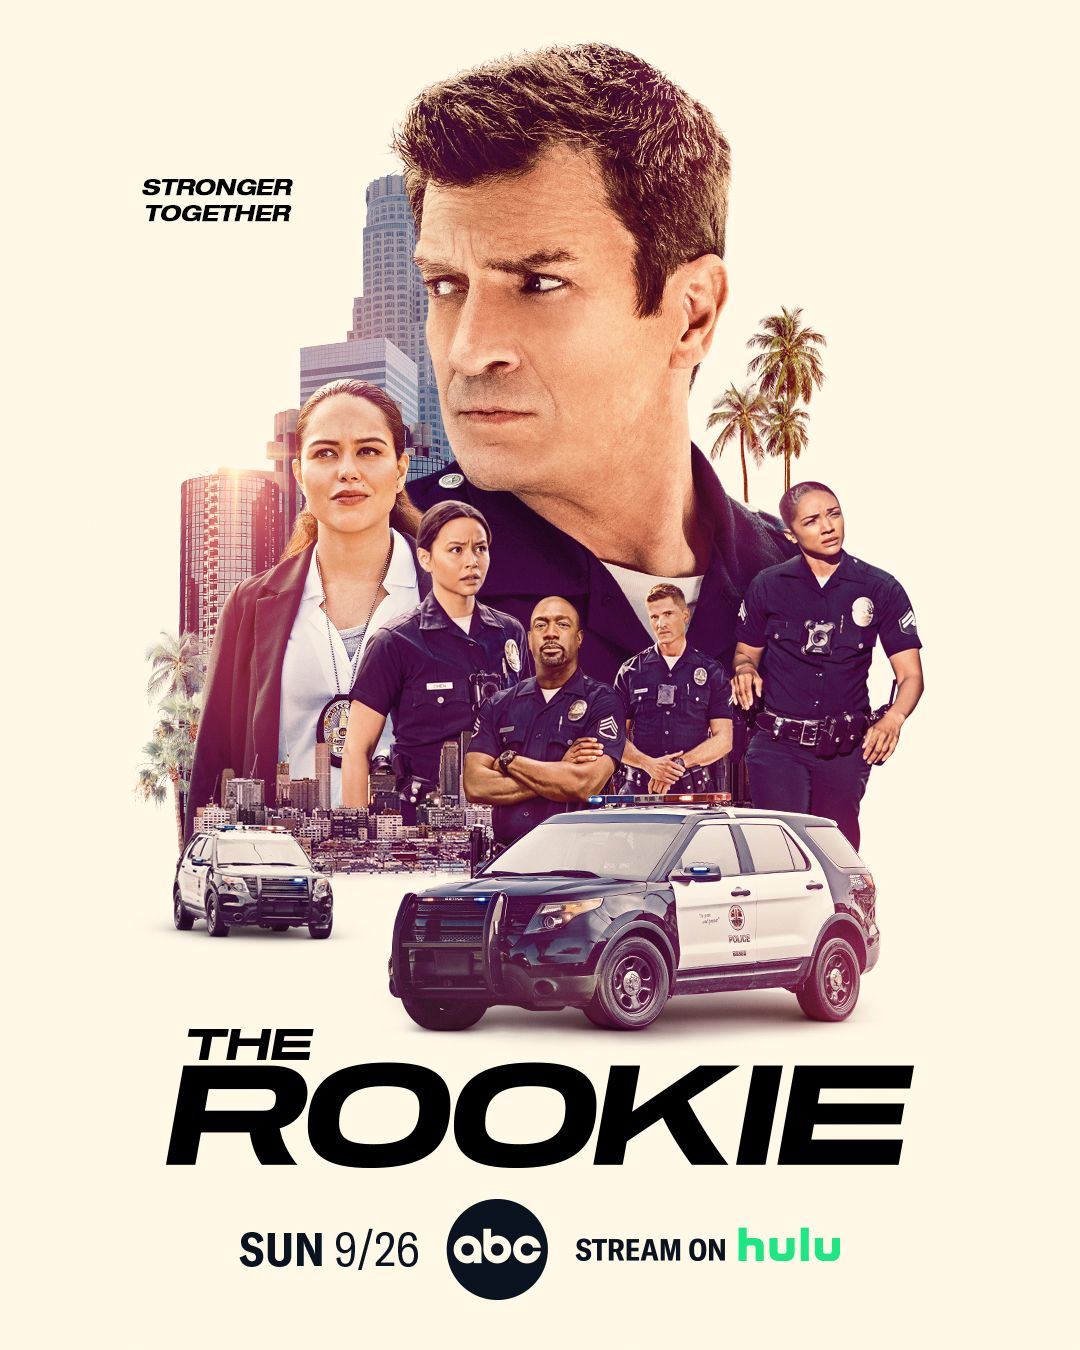 Nathan Hopes the Legacy of 'The Rookie' Lives on As It Hits 100 Episodes